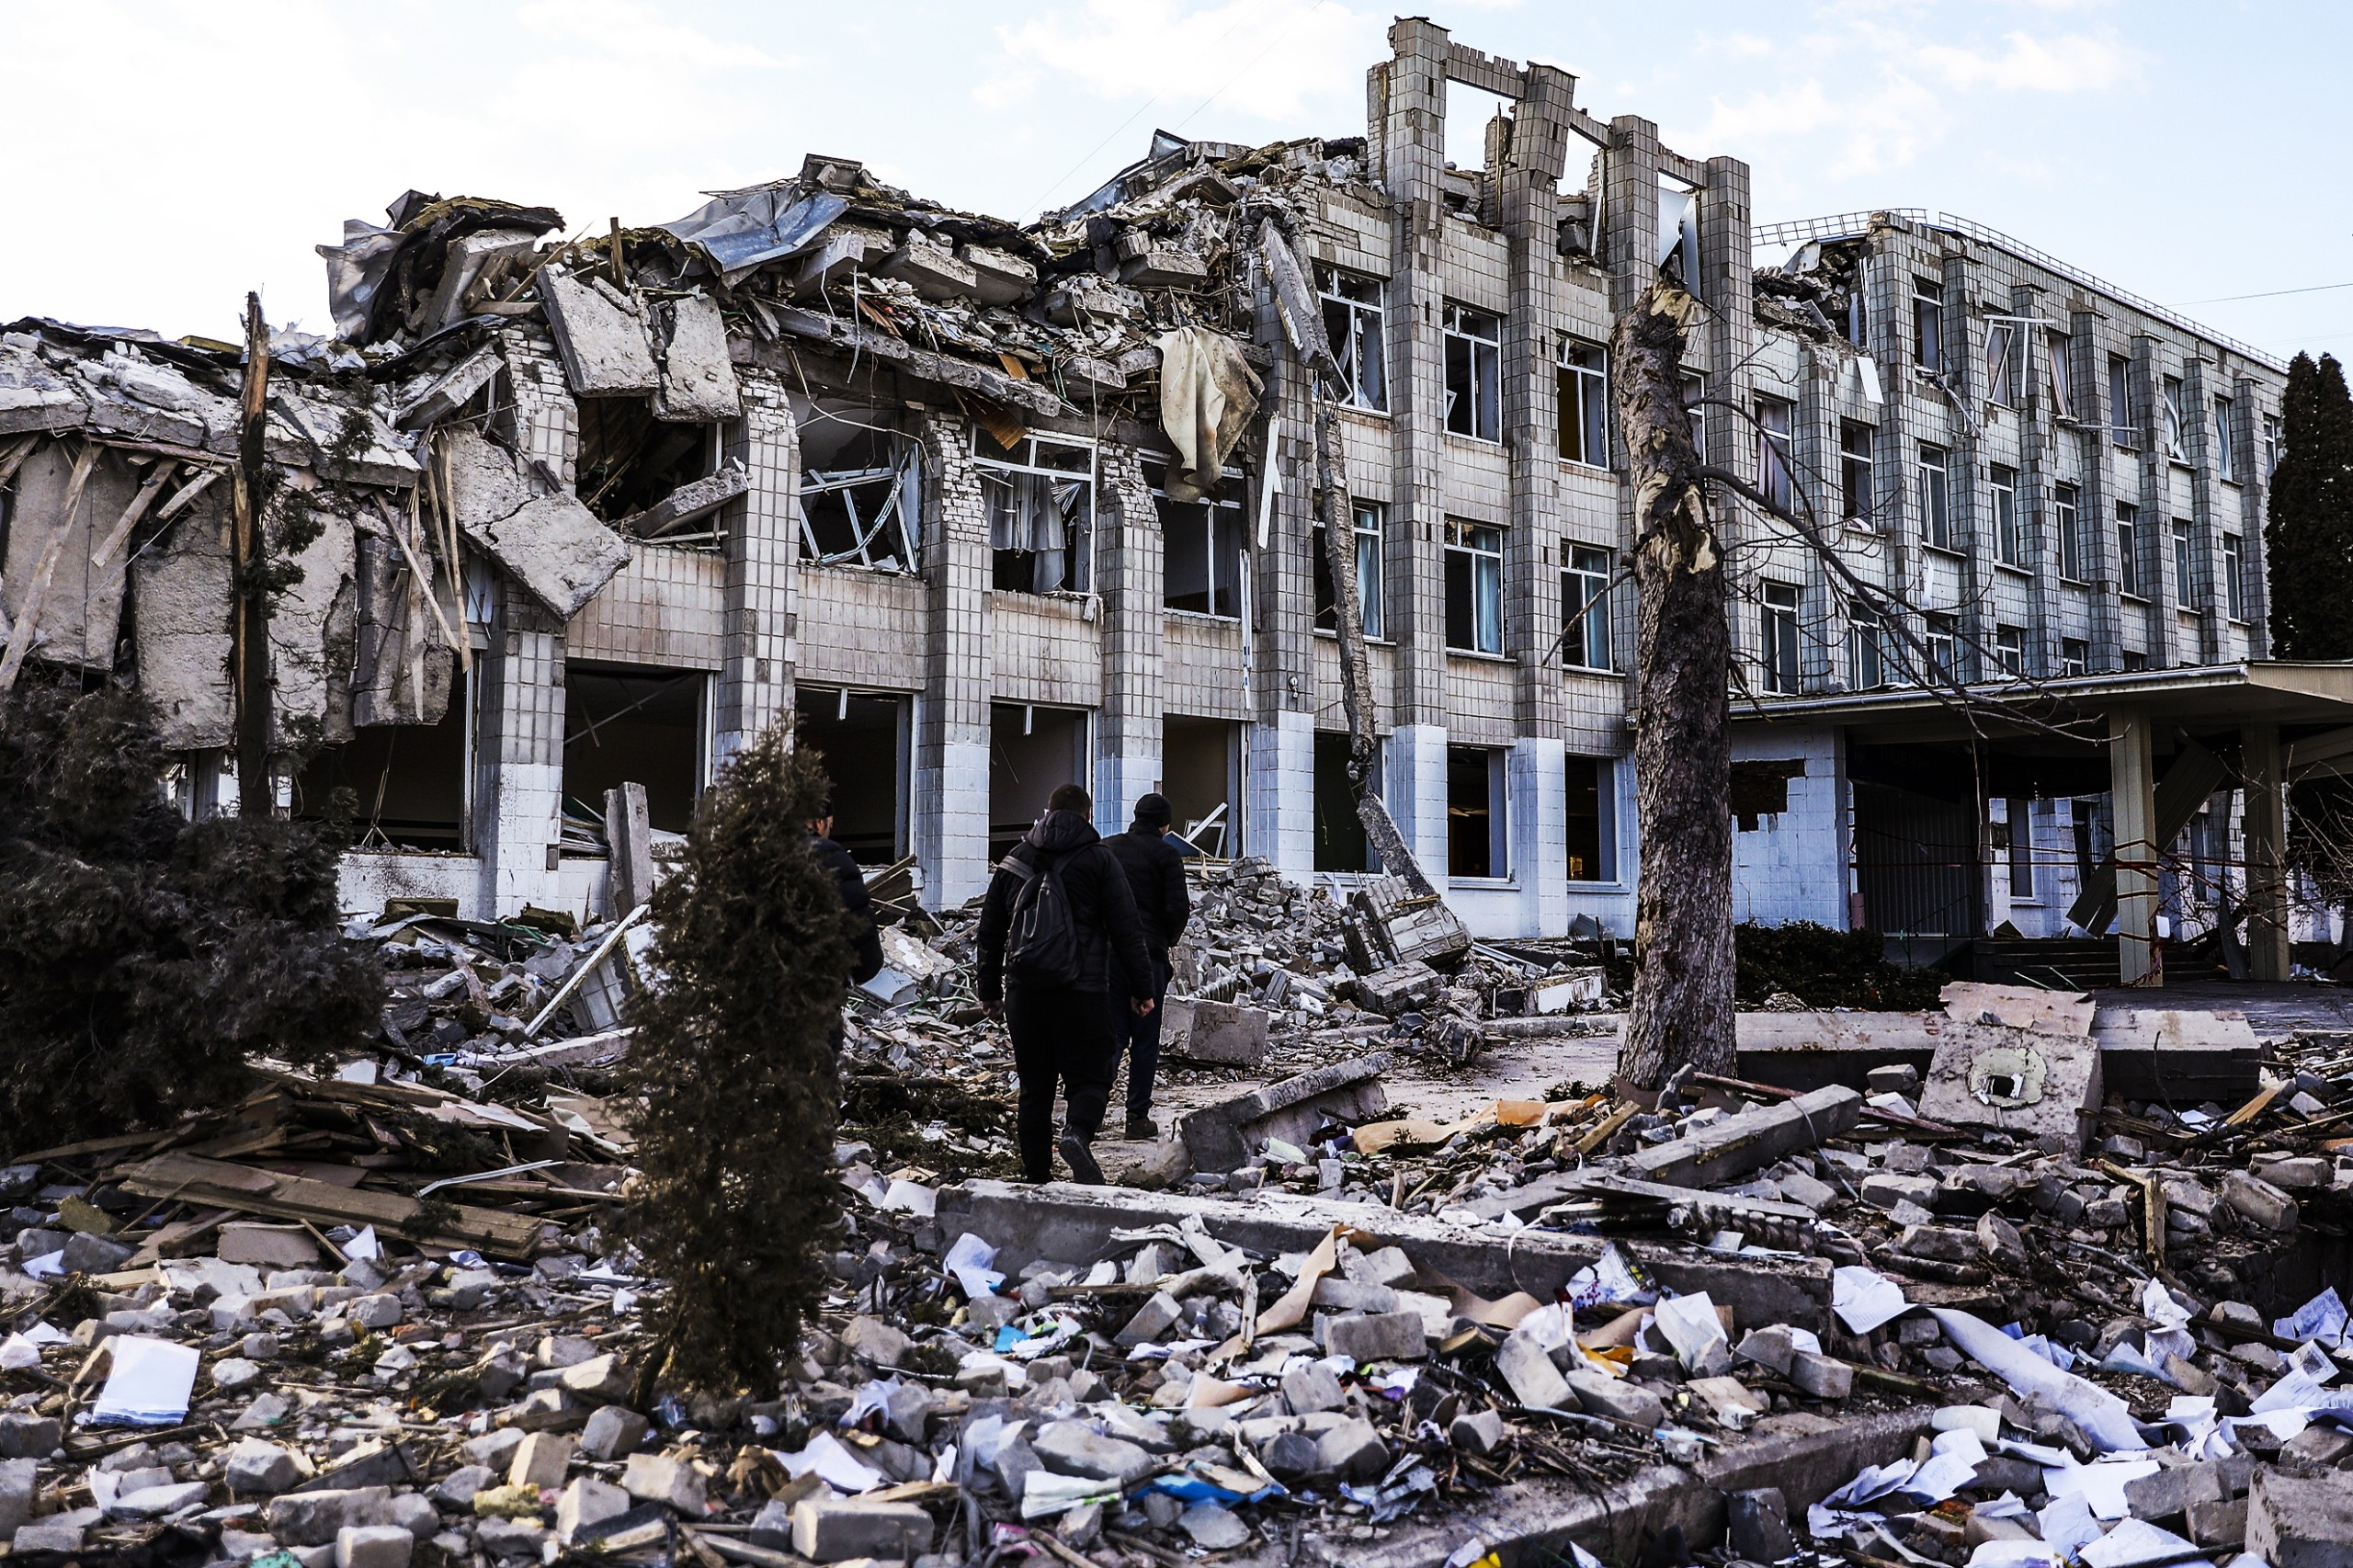 epa09818263 The destroyed main building of school number 25, after being bombed  in Zhytomyr, Ukraine, 11 March 2022. According to the United Nations refugee agency UNHCR, over 2.5 million people have fled Ukraine since the Russian invasion began on 24 February. Many, however, have decided to stay and fight.  EPA/MIGUEL A. LOPES